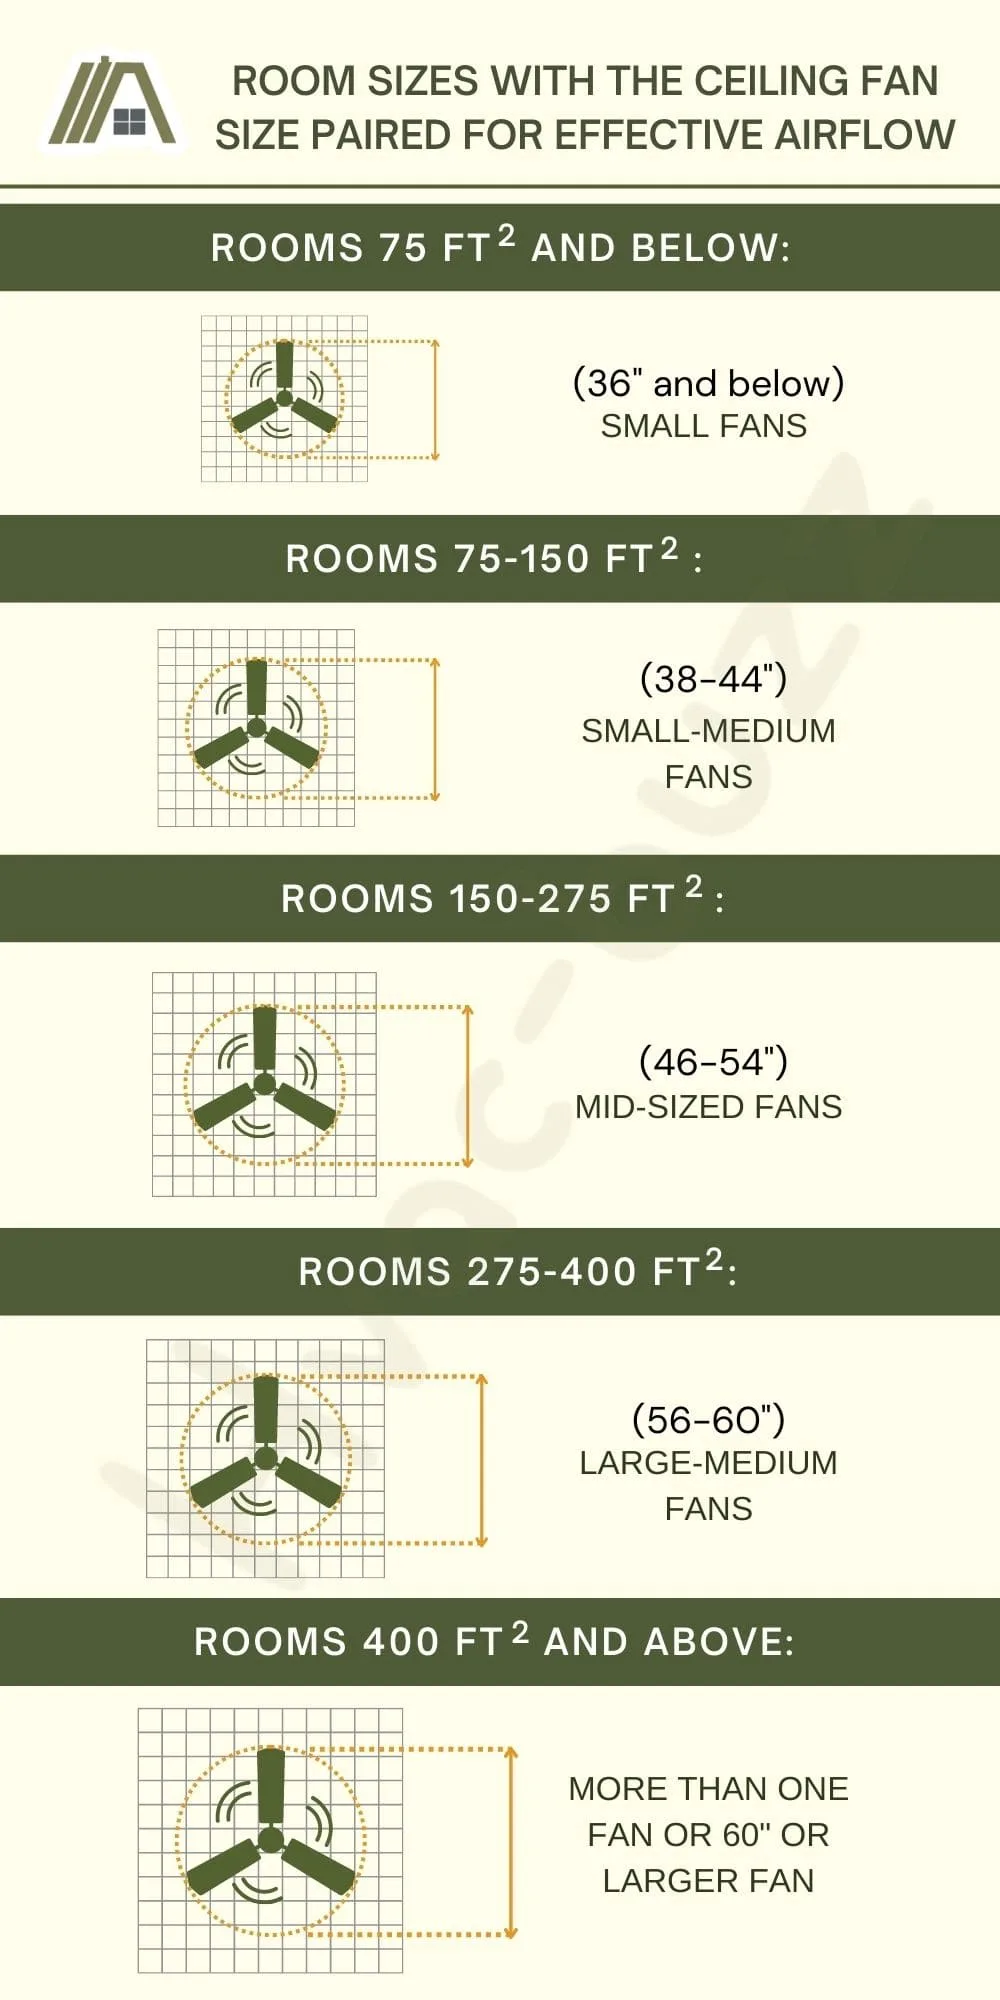 Room sizes with the ceiling fan size paired for effective airflow